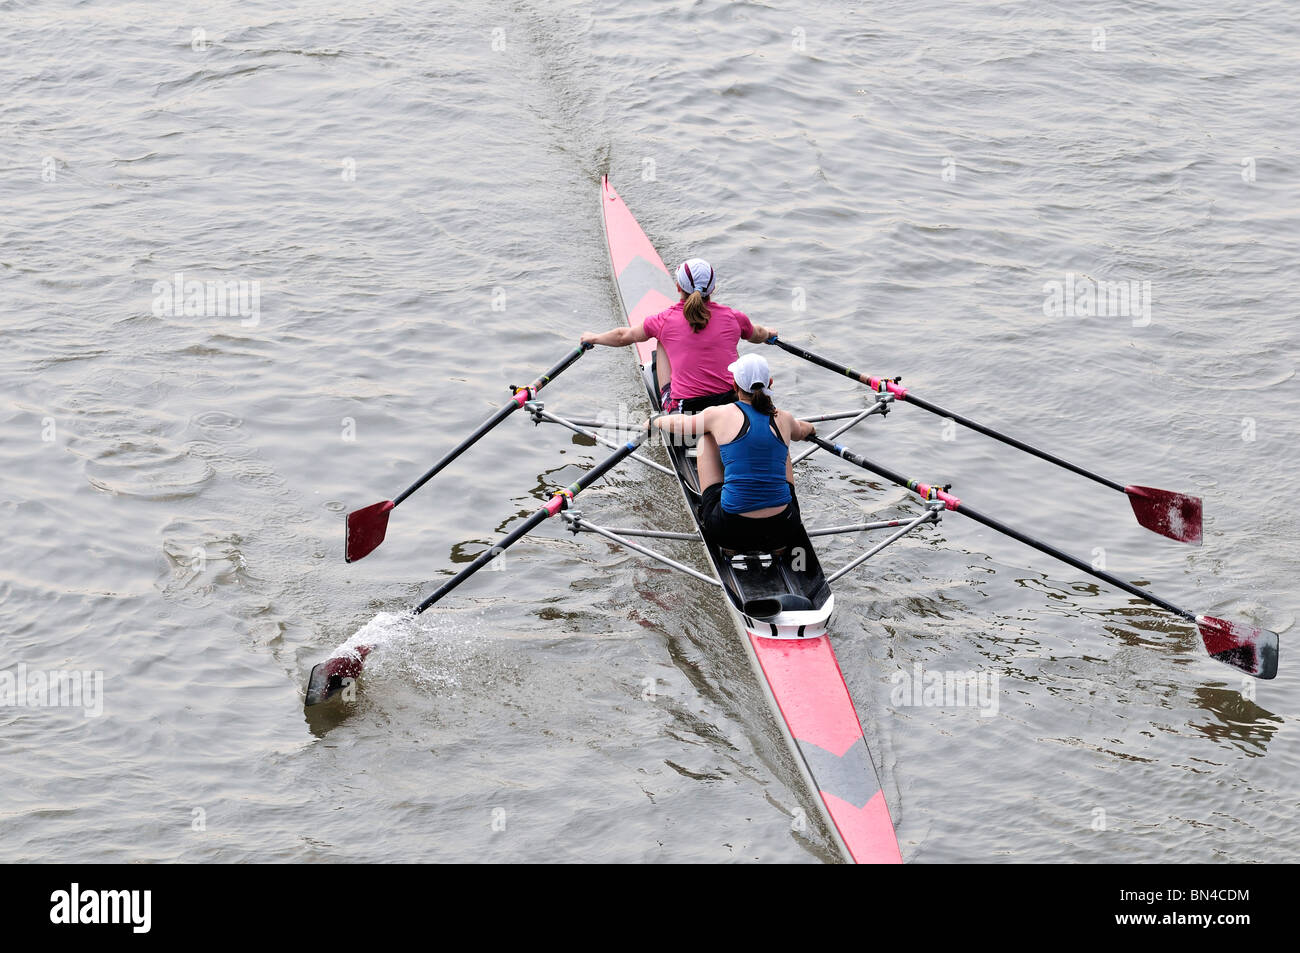 Rowing on the Thames at Hammersmith, London, United Kingdom Stock Photo